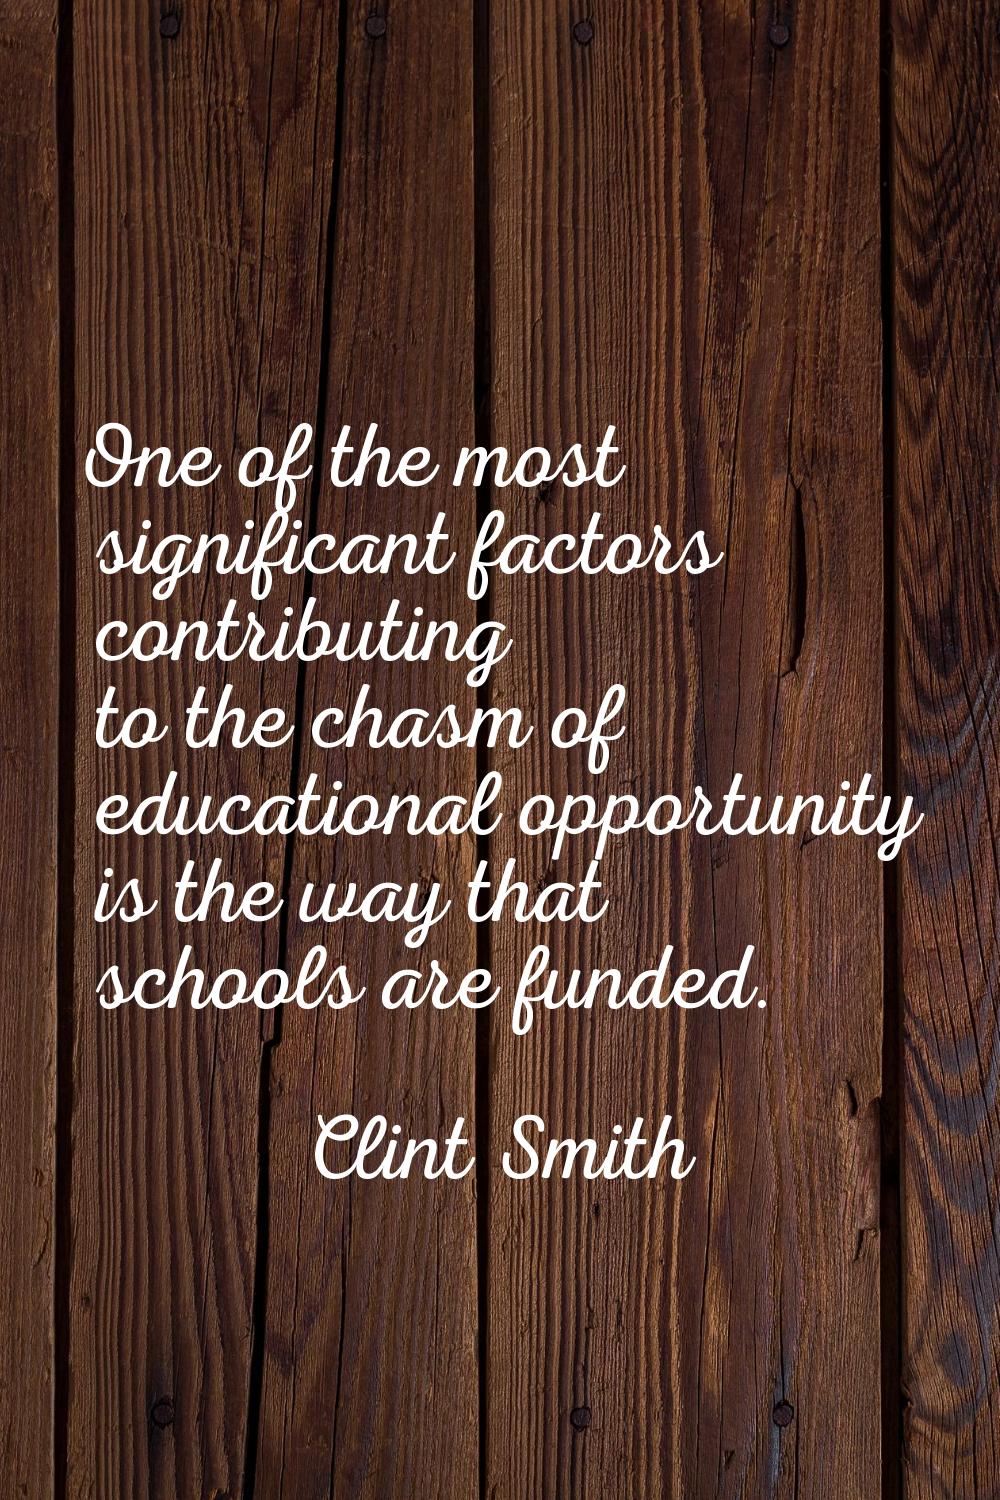 One of the most significant factors contributing to the chasm of educational opportunity is the way